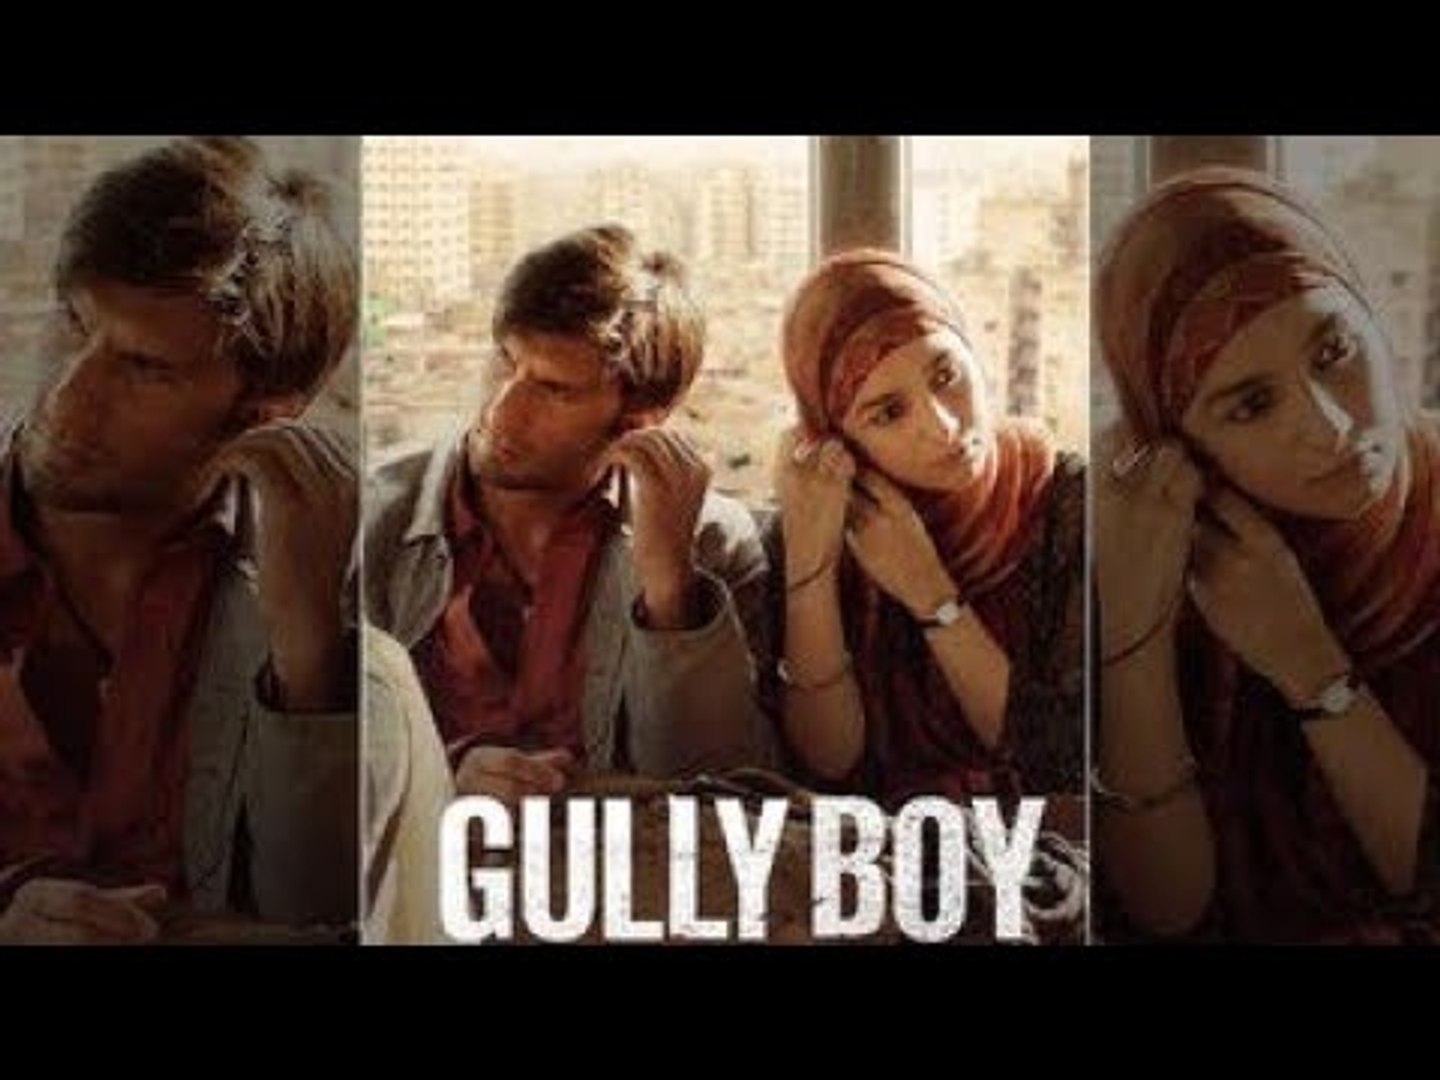 Gully boy full movie free download about leadership pdf download